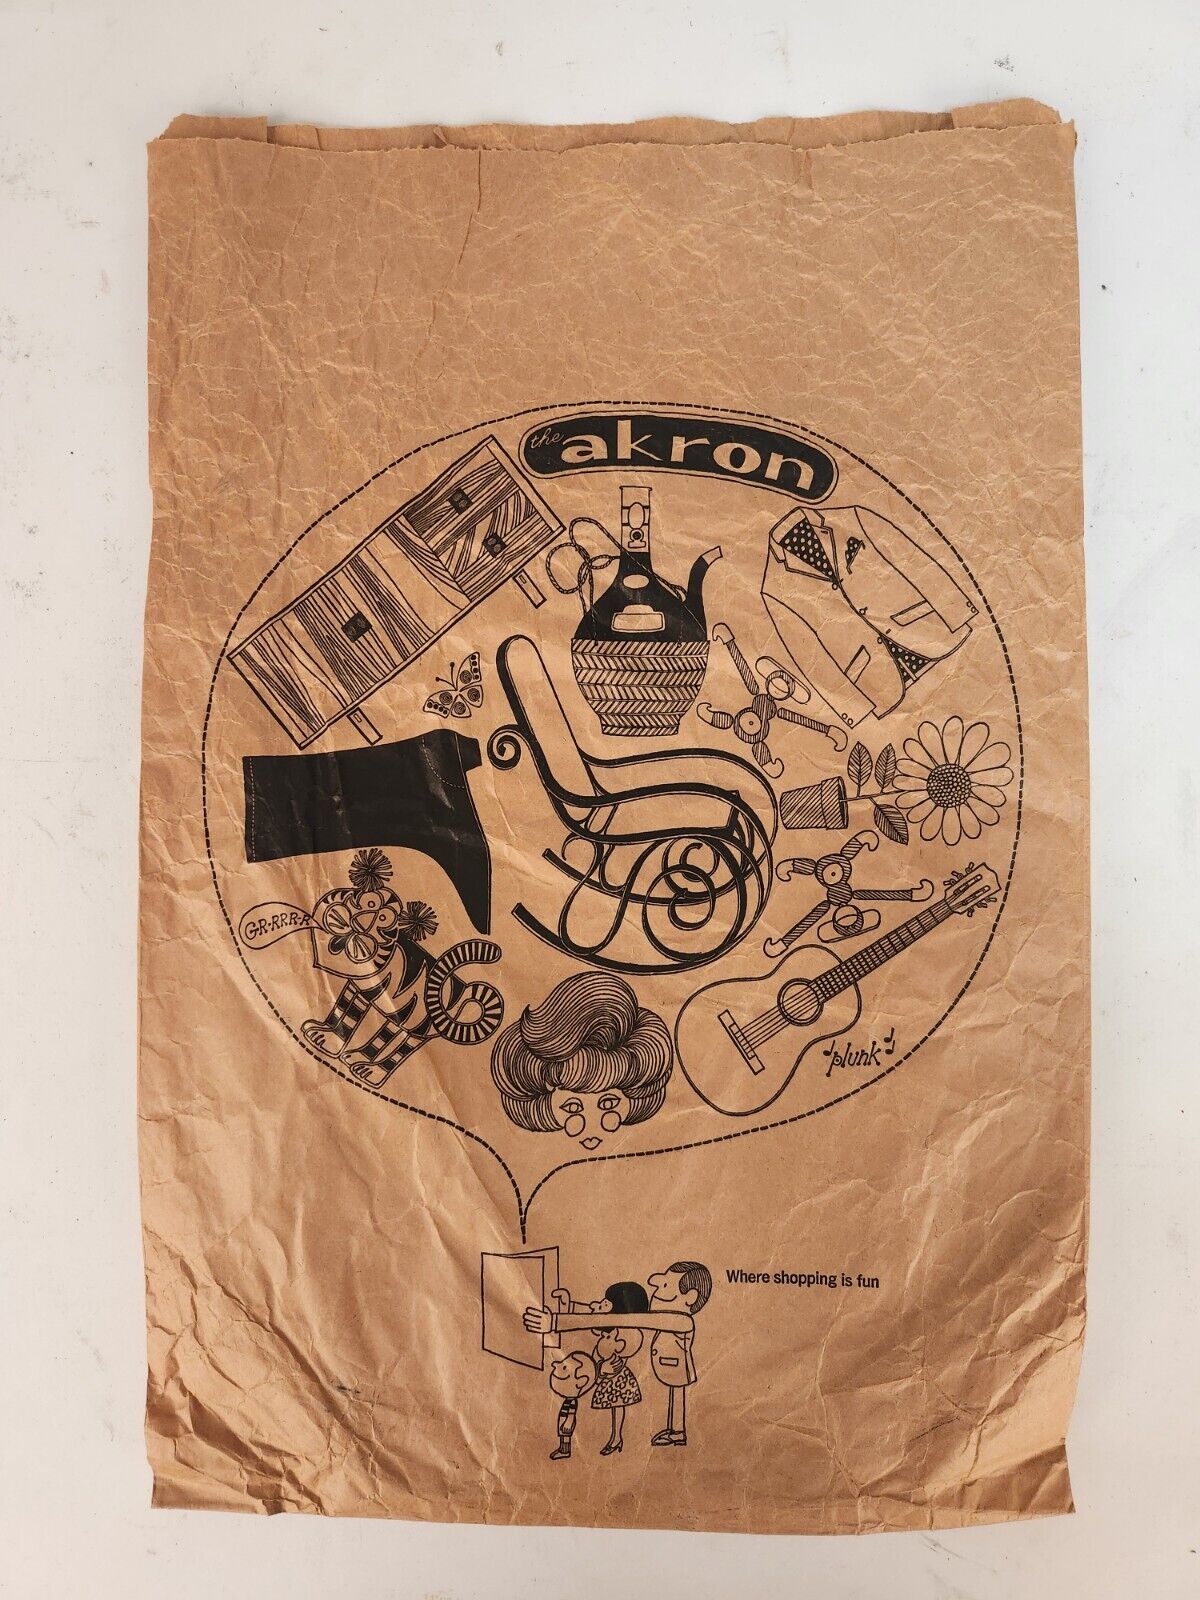 1960s Paper Bag From The Akron MCM Design